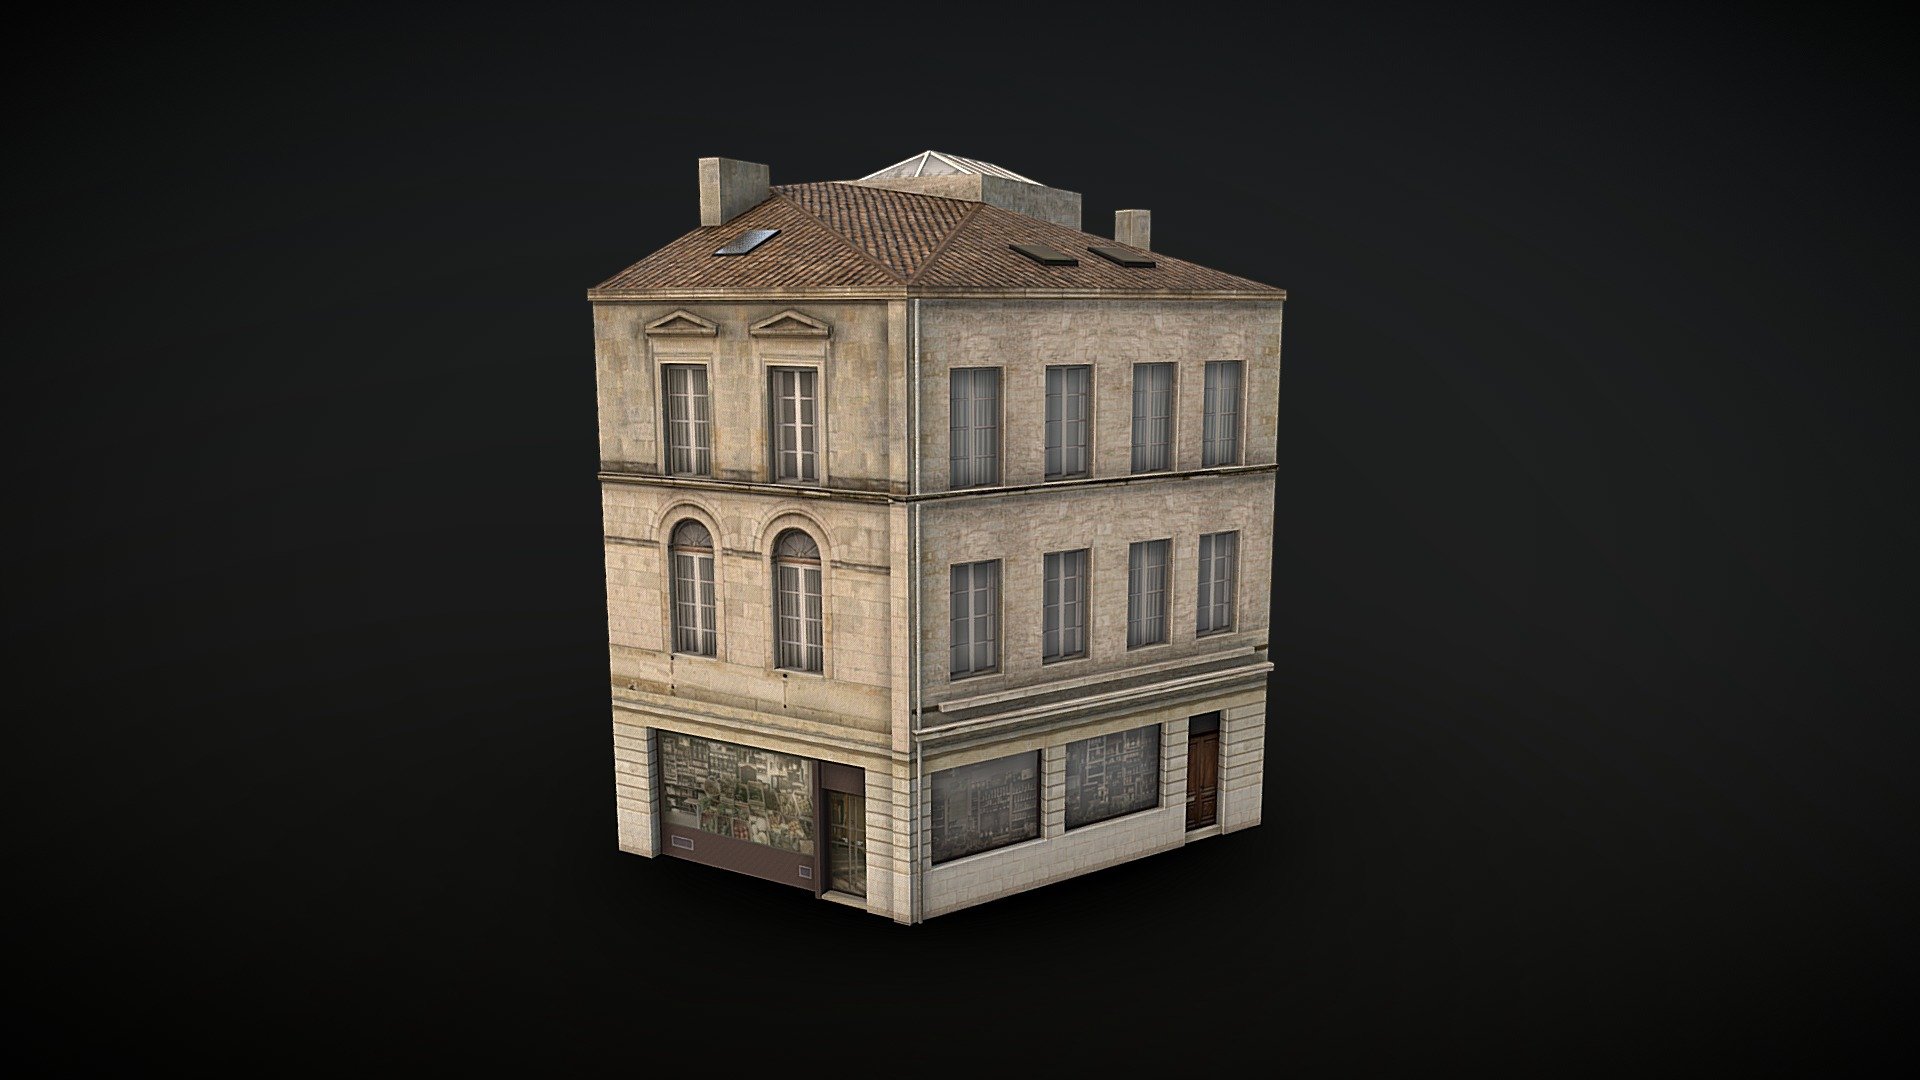 Bordeaux Thiers Corner #3
Asset for Cities: Skylines - Thiers corner #3 - Buy Royalty Free 3D model by GrunyStudio 3d model